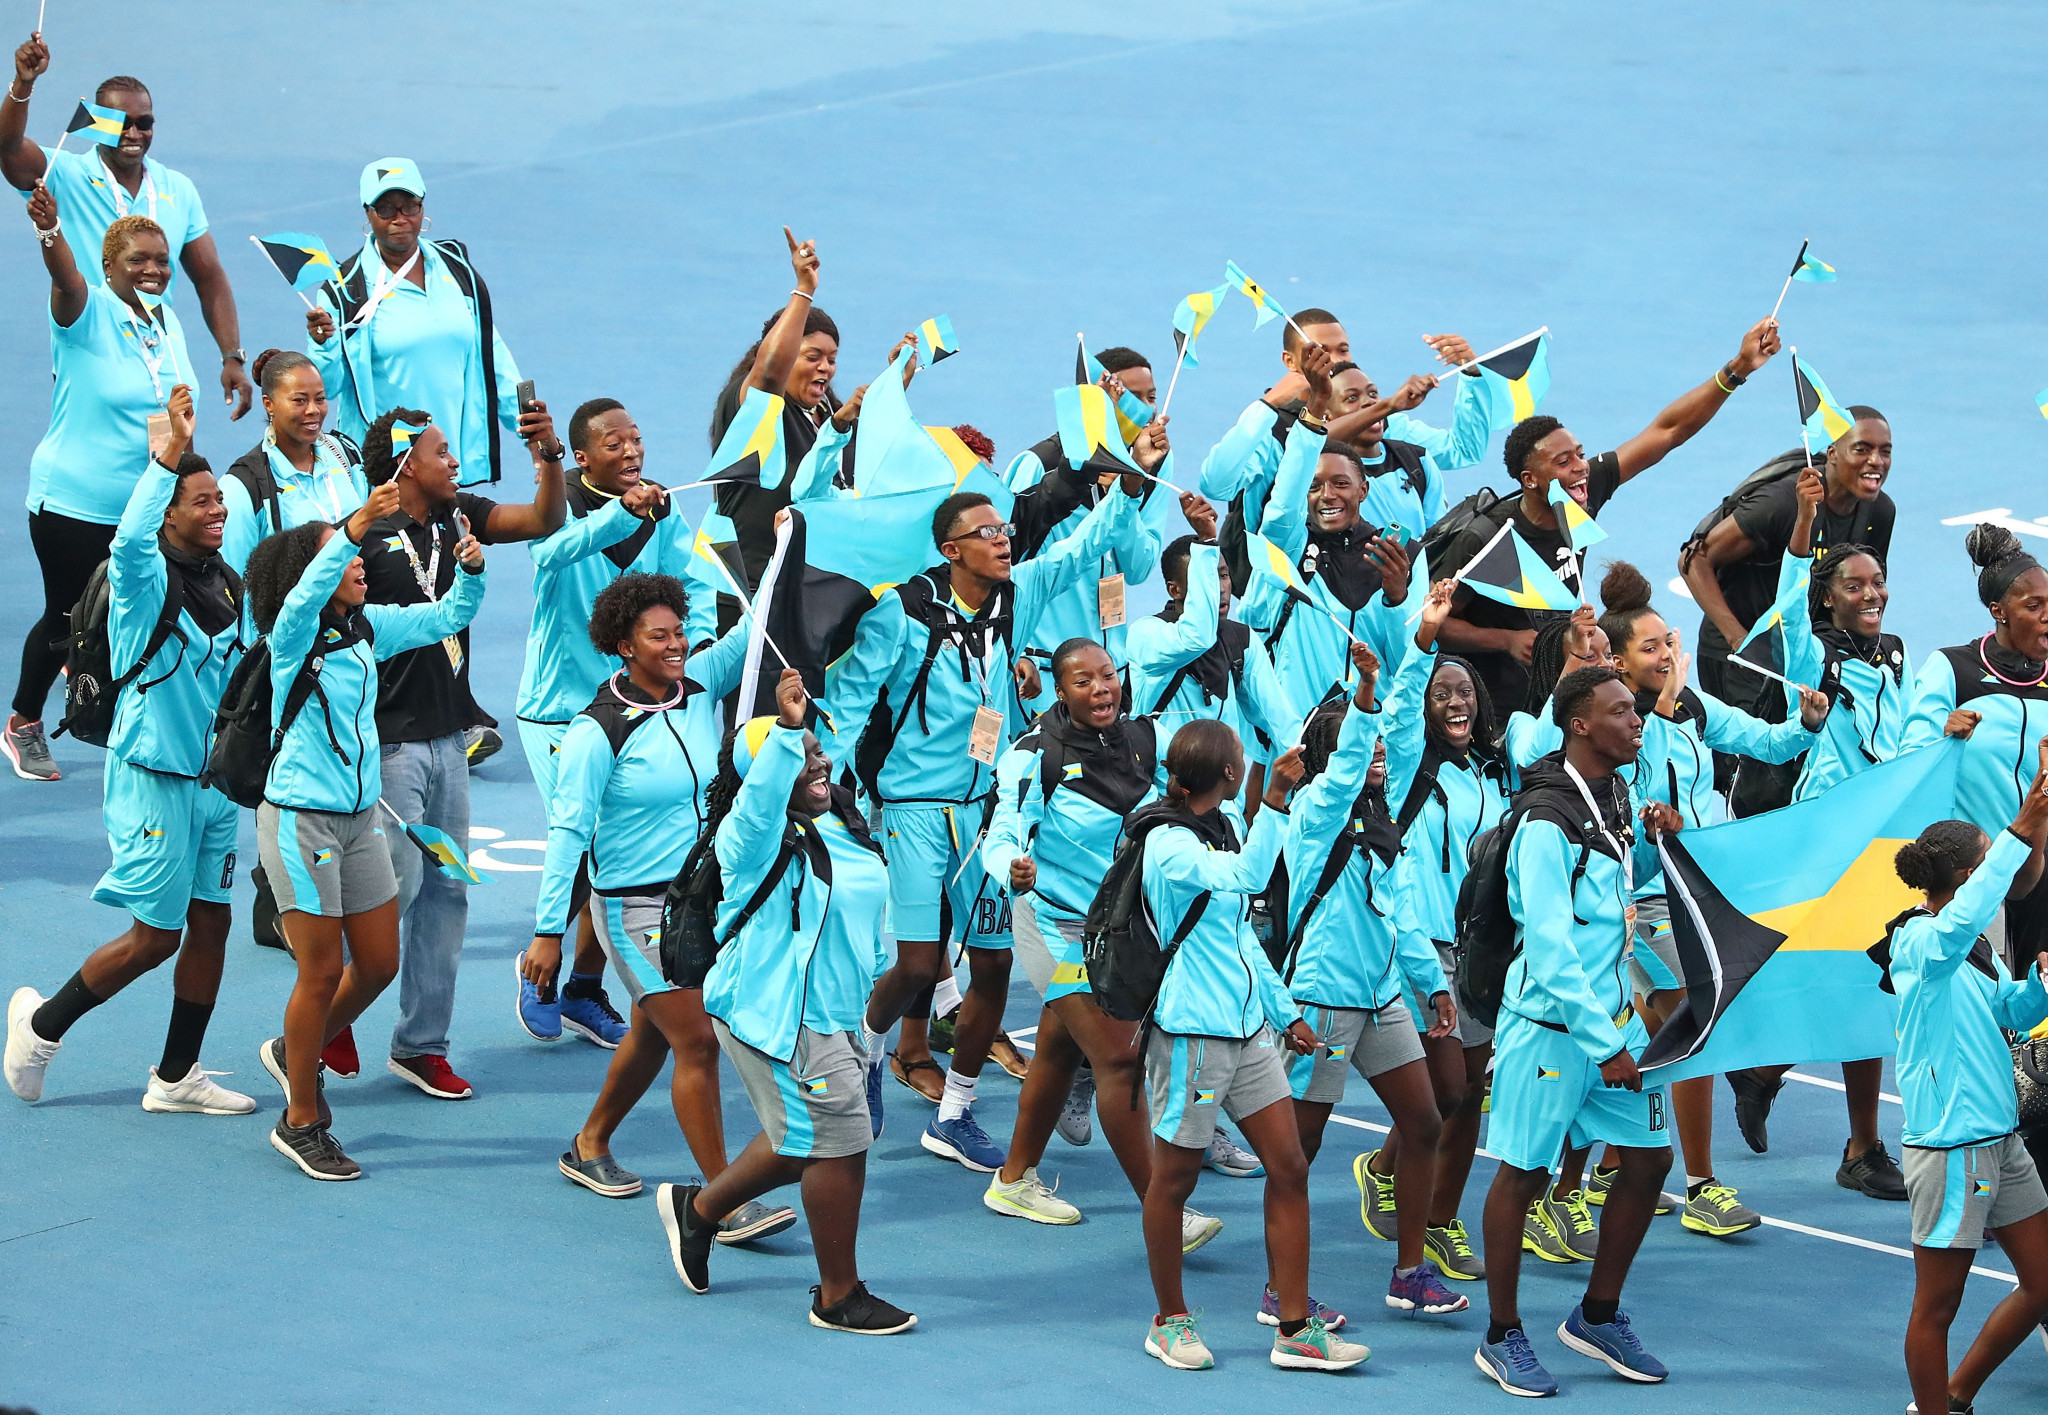 Bahamas sport has battled against both COVID-19 and climate issues ©Getty Images